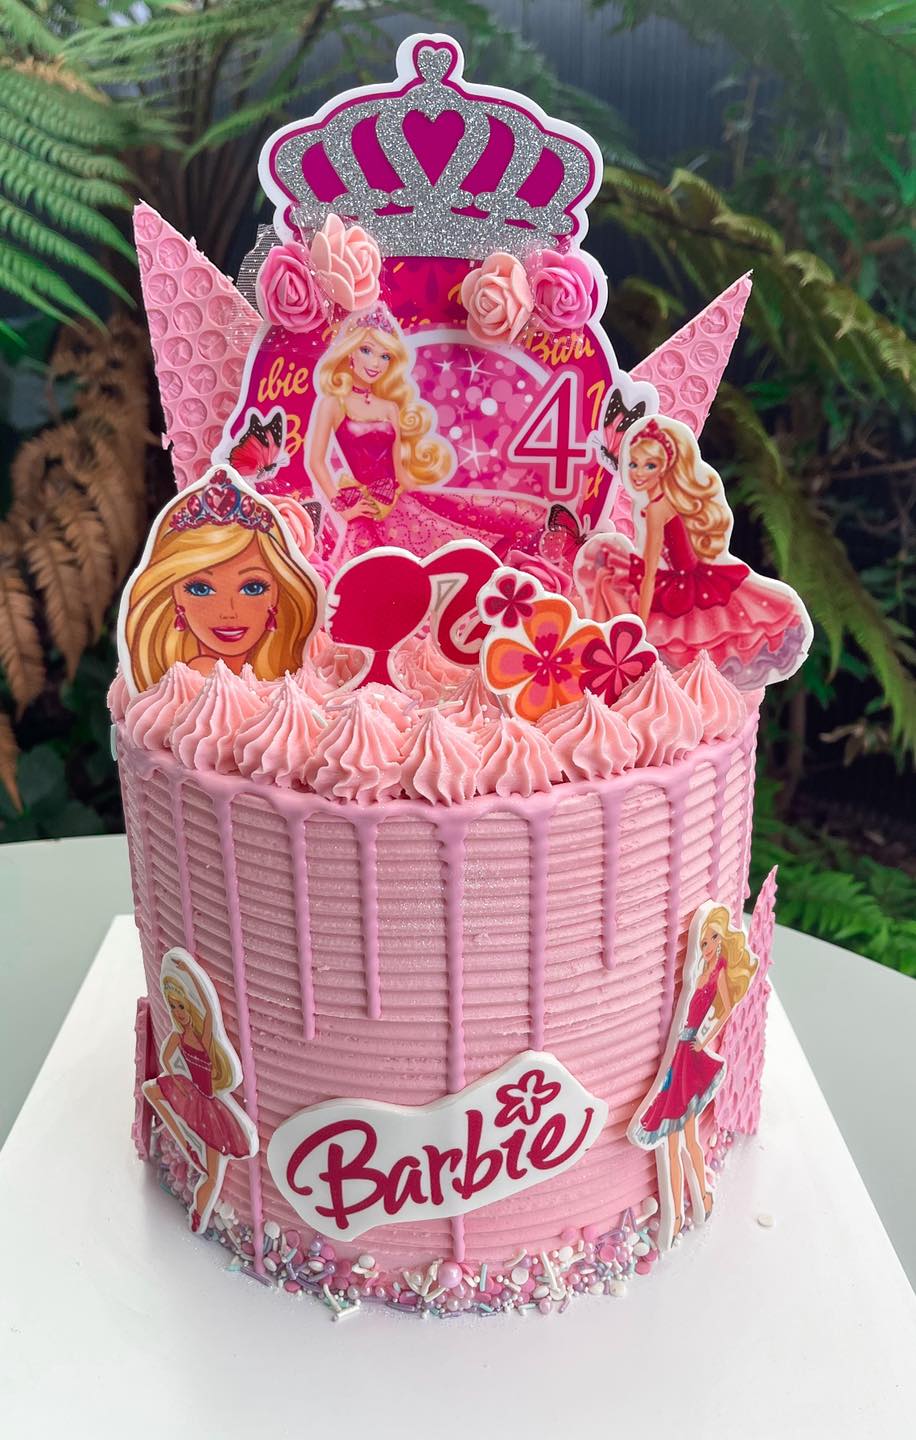 Colourful Barbie Doll Eggless Cake Delivery In Delhi NCR-hanic.com.vn